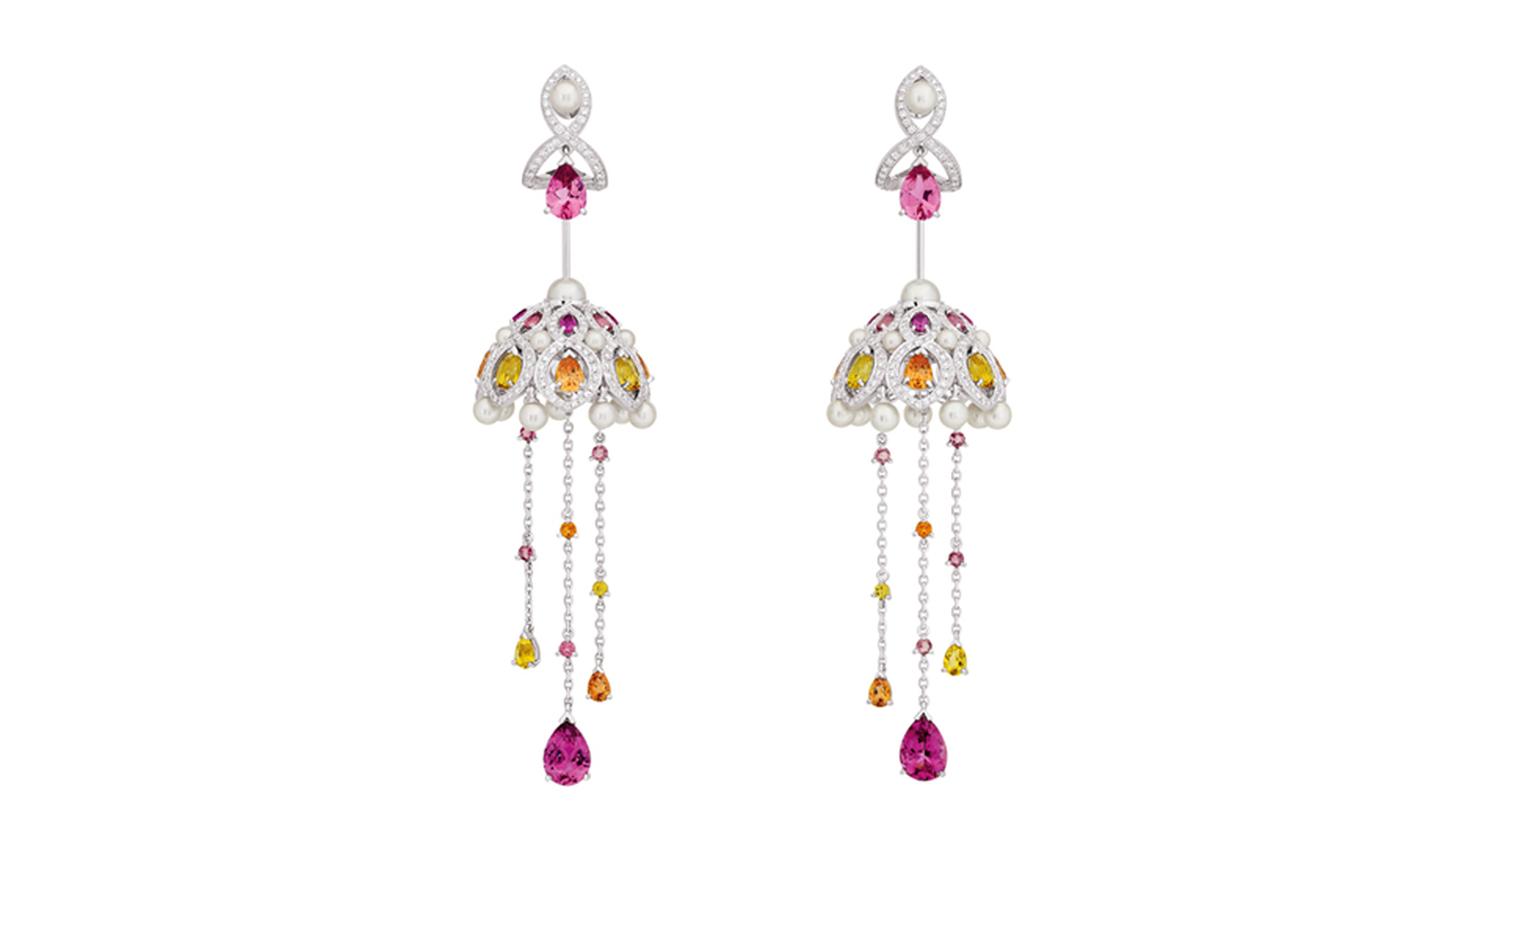 Chanel Secrets D'Orient Coupoles Earrings in 18 karat white gold, diamonds, cultured pearls, rebellites, pink tourmalines, garnets and citrines. POA